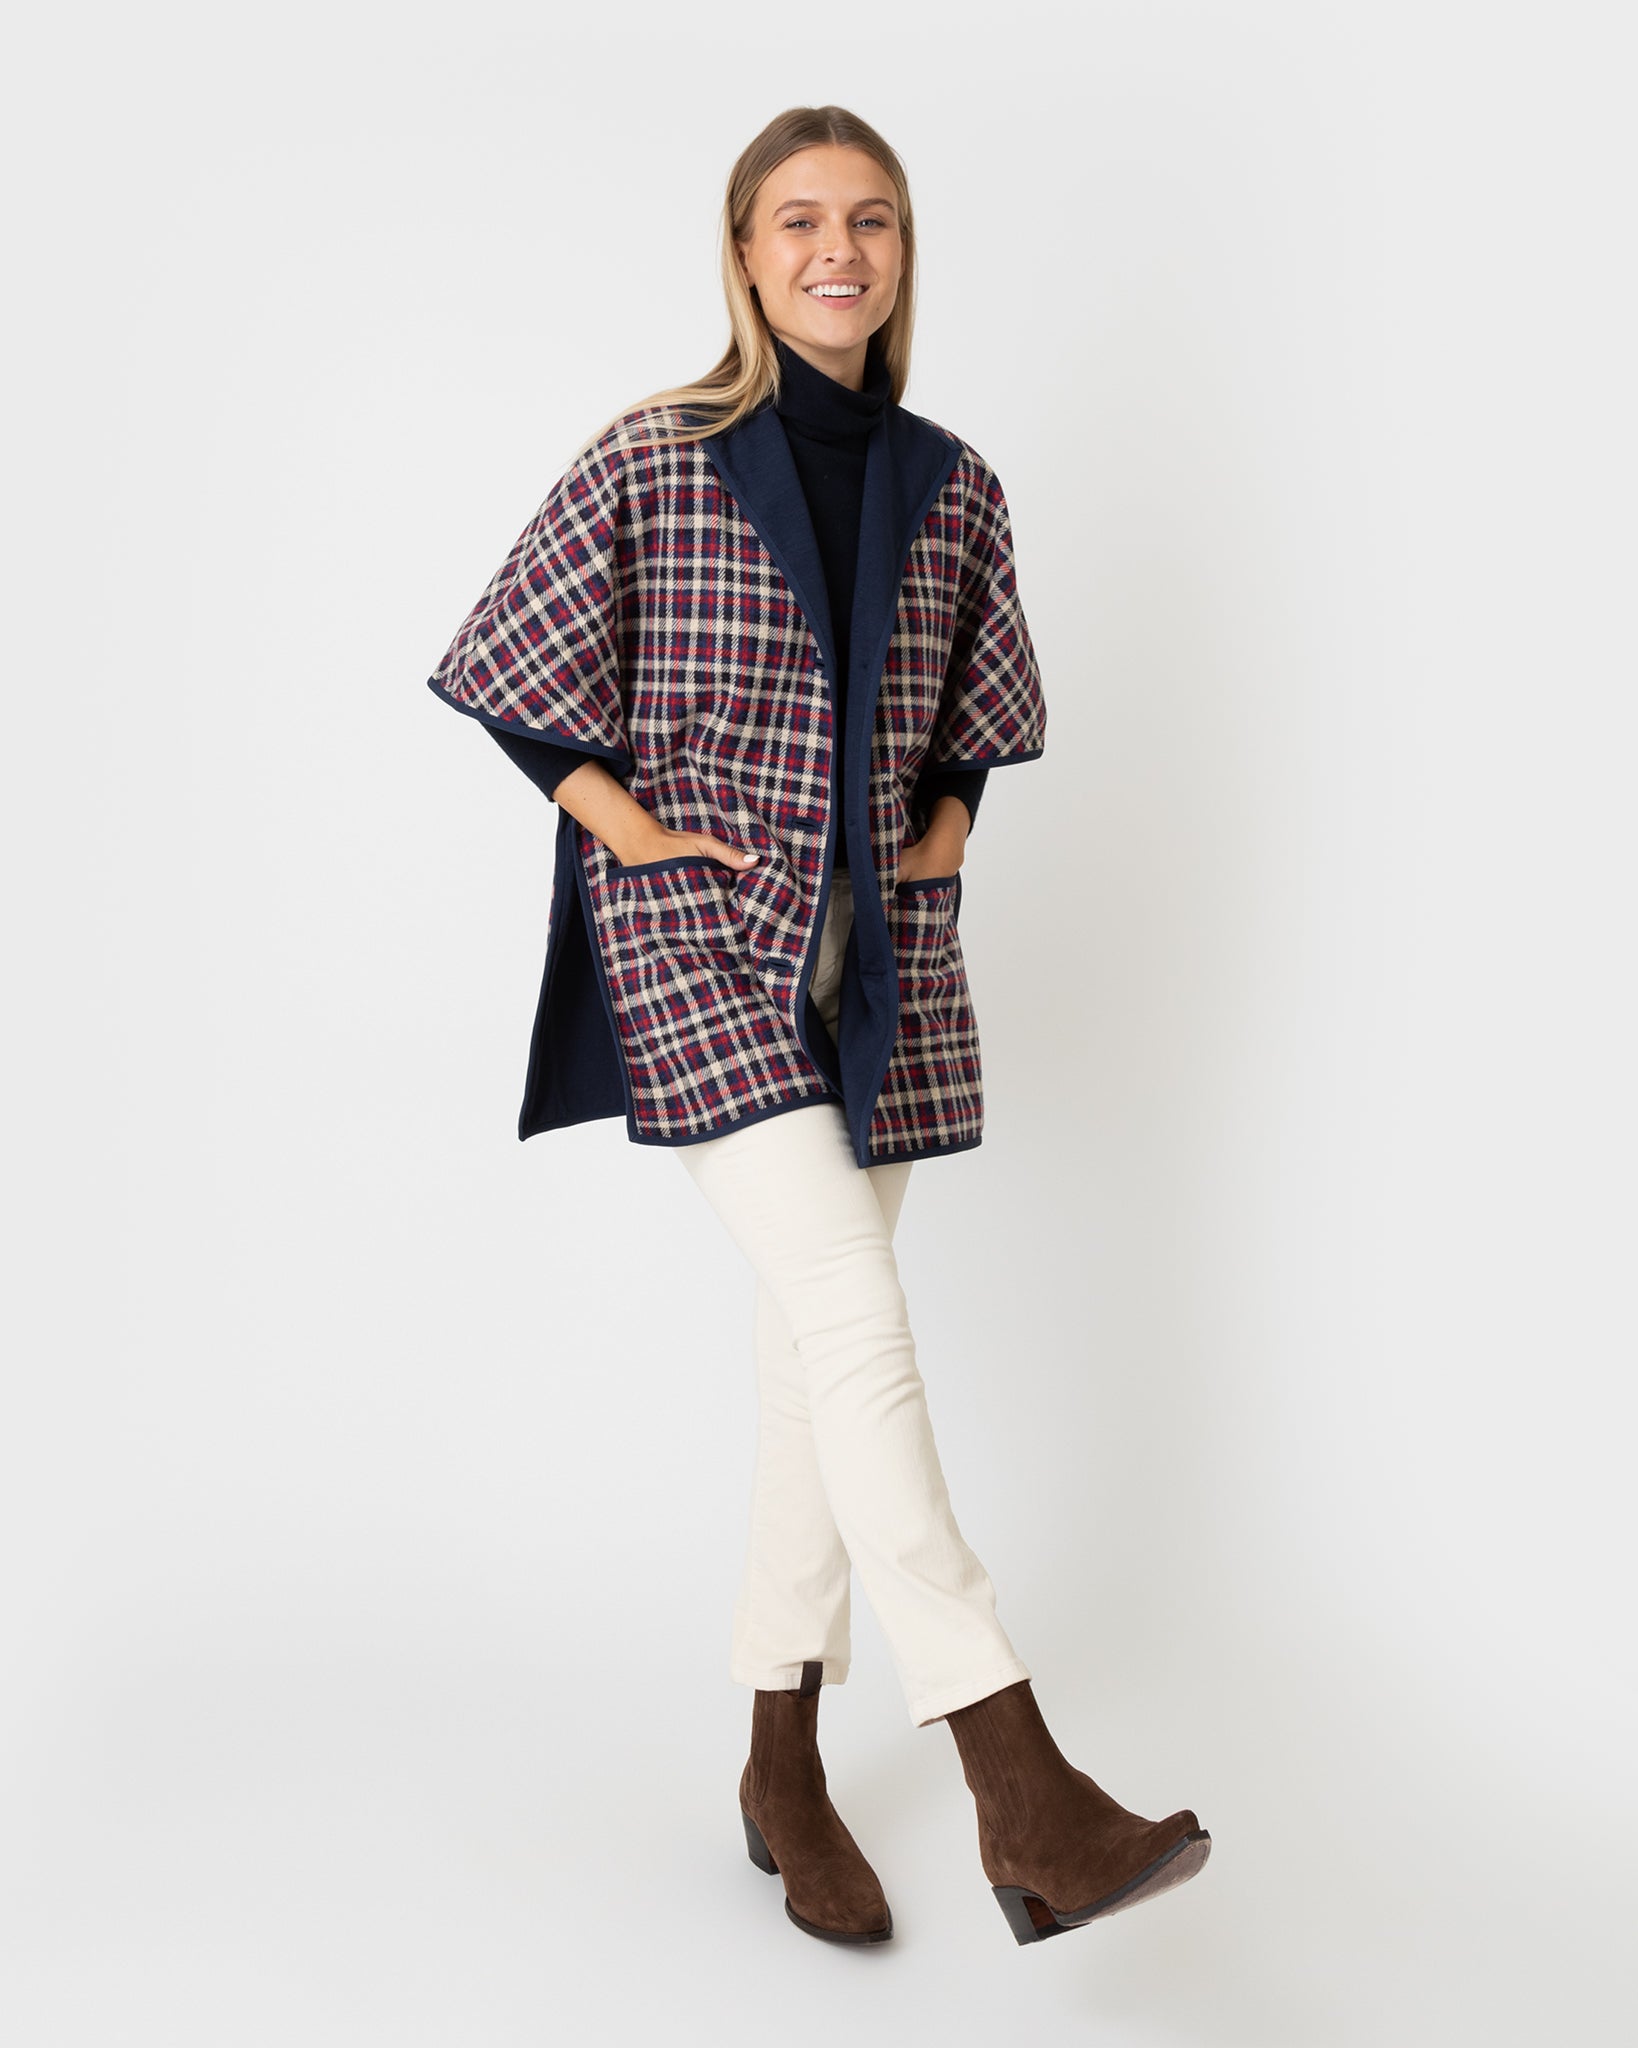 Arya Cape in Navy/Red Multi Plaid Knit